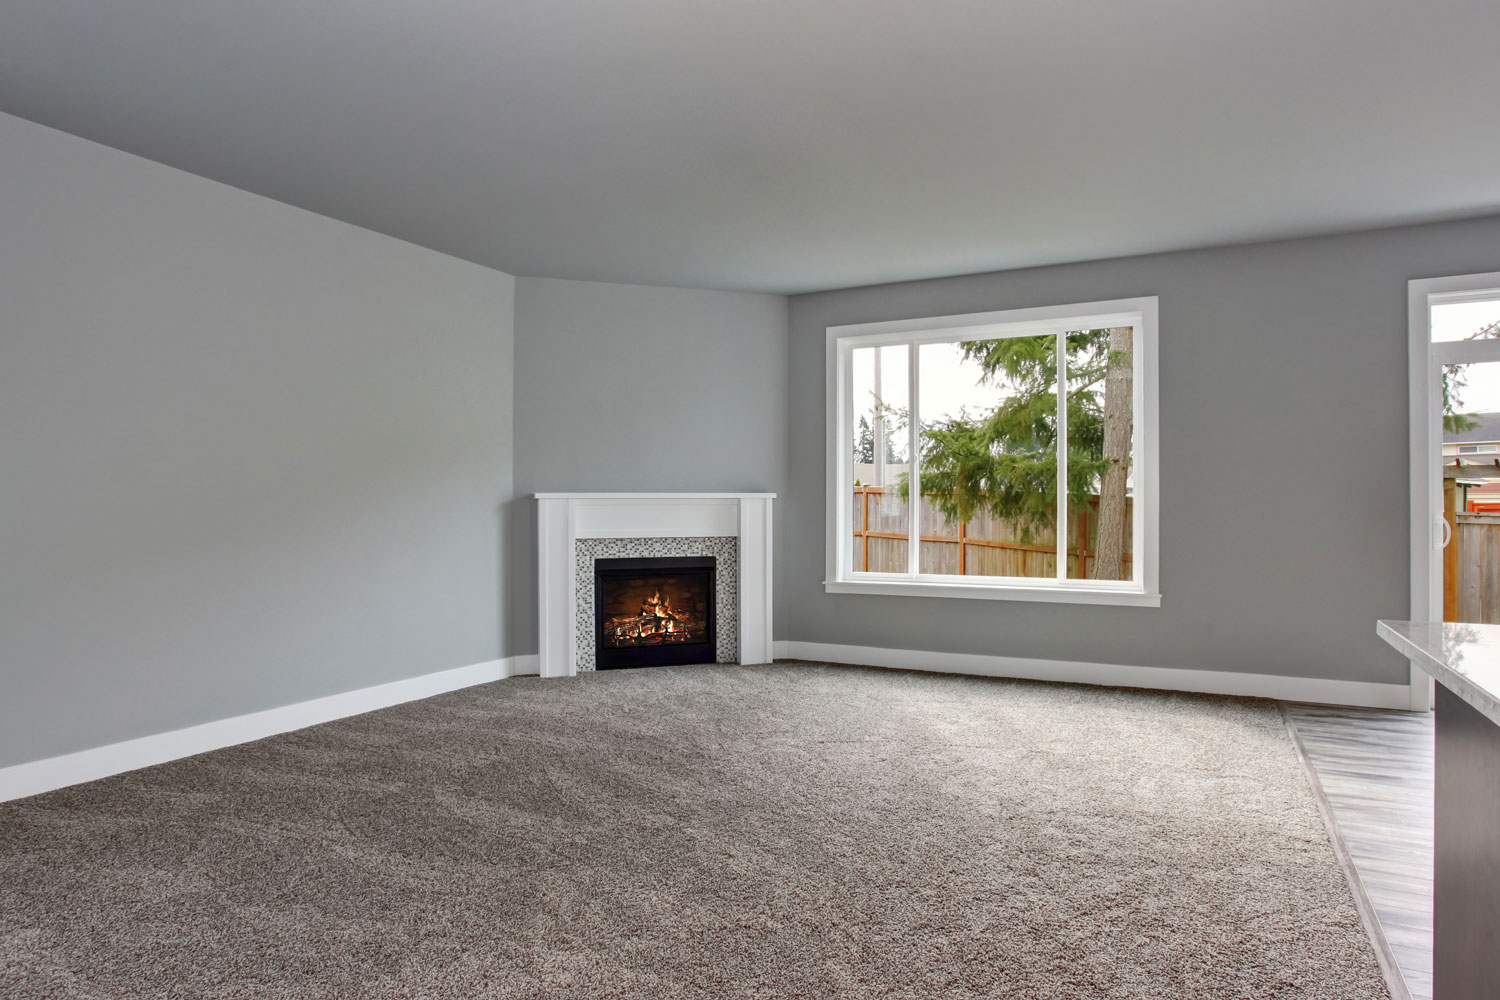 Gray carpeted flooring, light gray walls and white trims